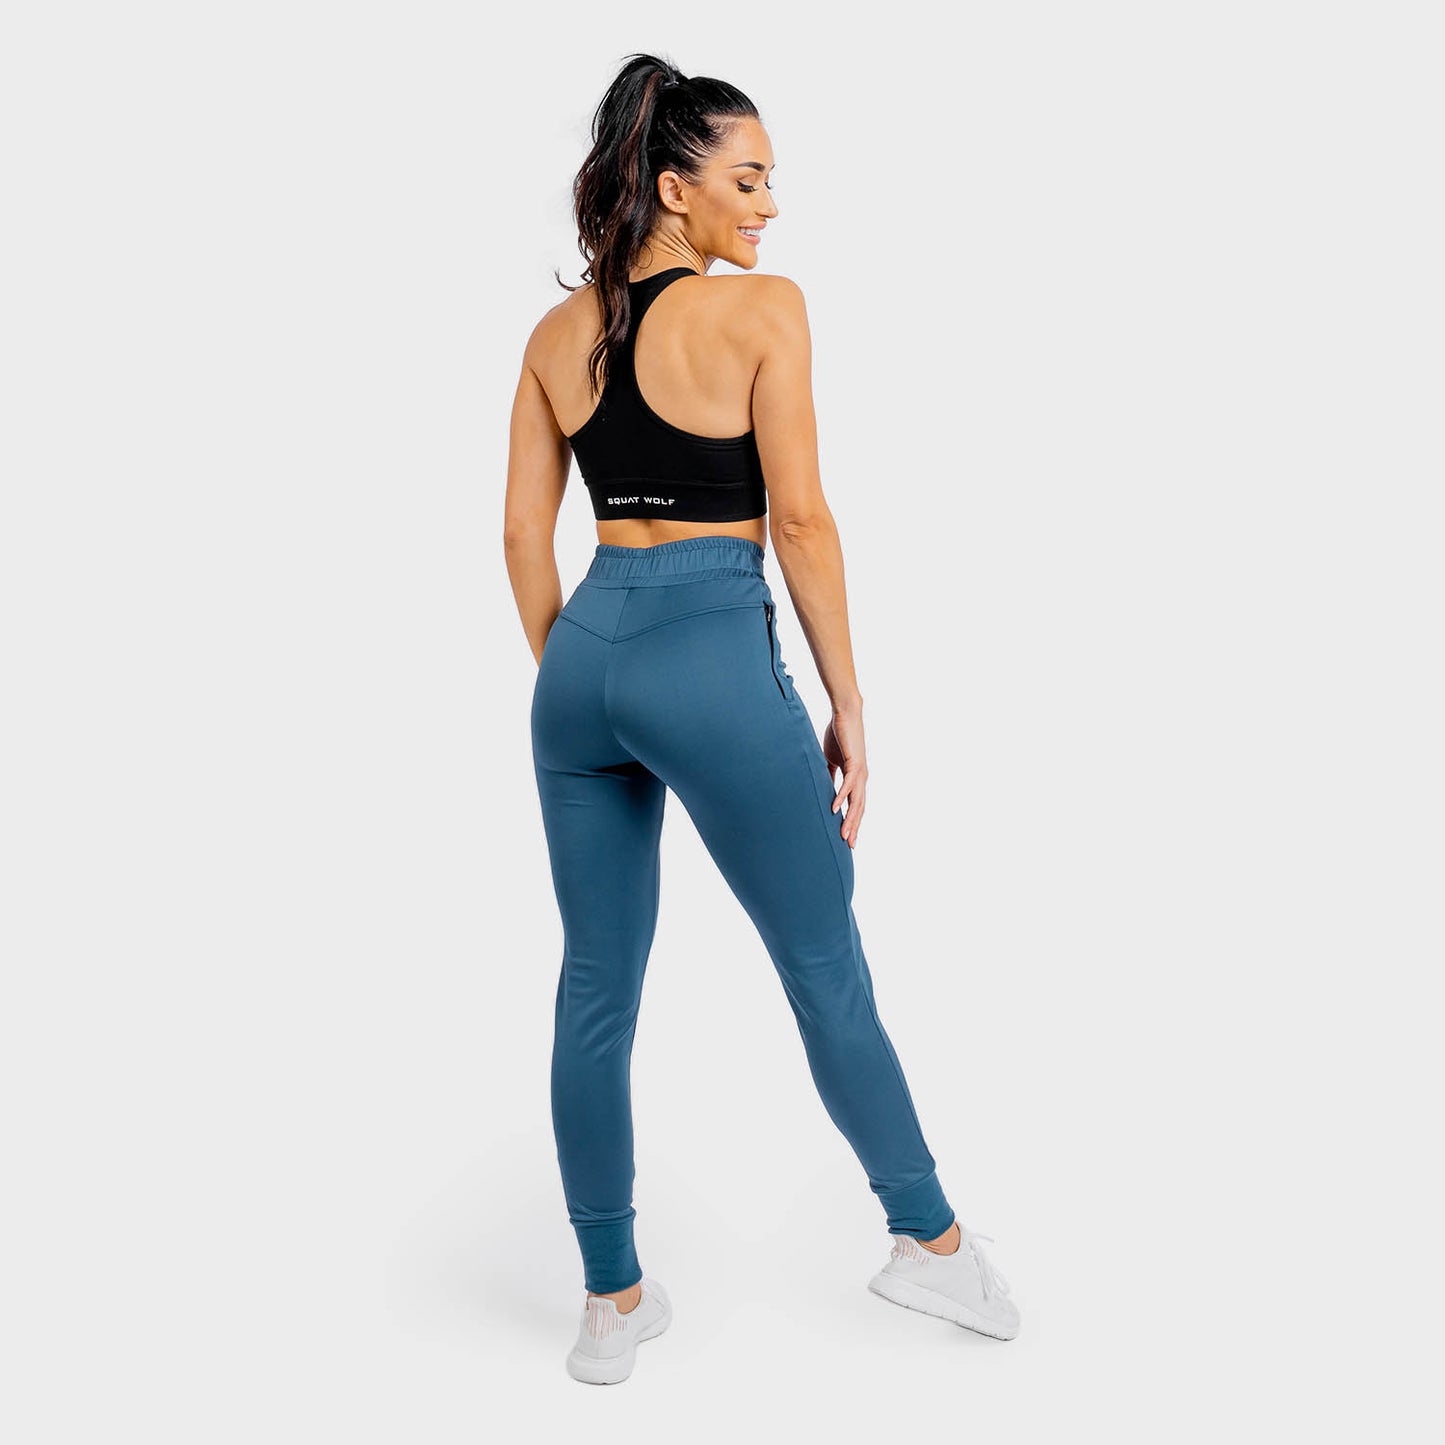 squatwolf-gym-pants-for-women-she-wolf-do-knot-joggers-teal-workout-clothes